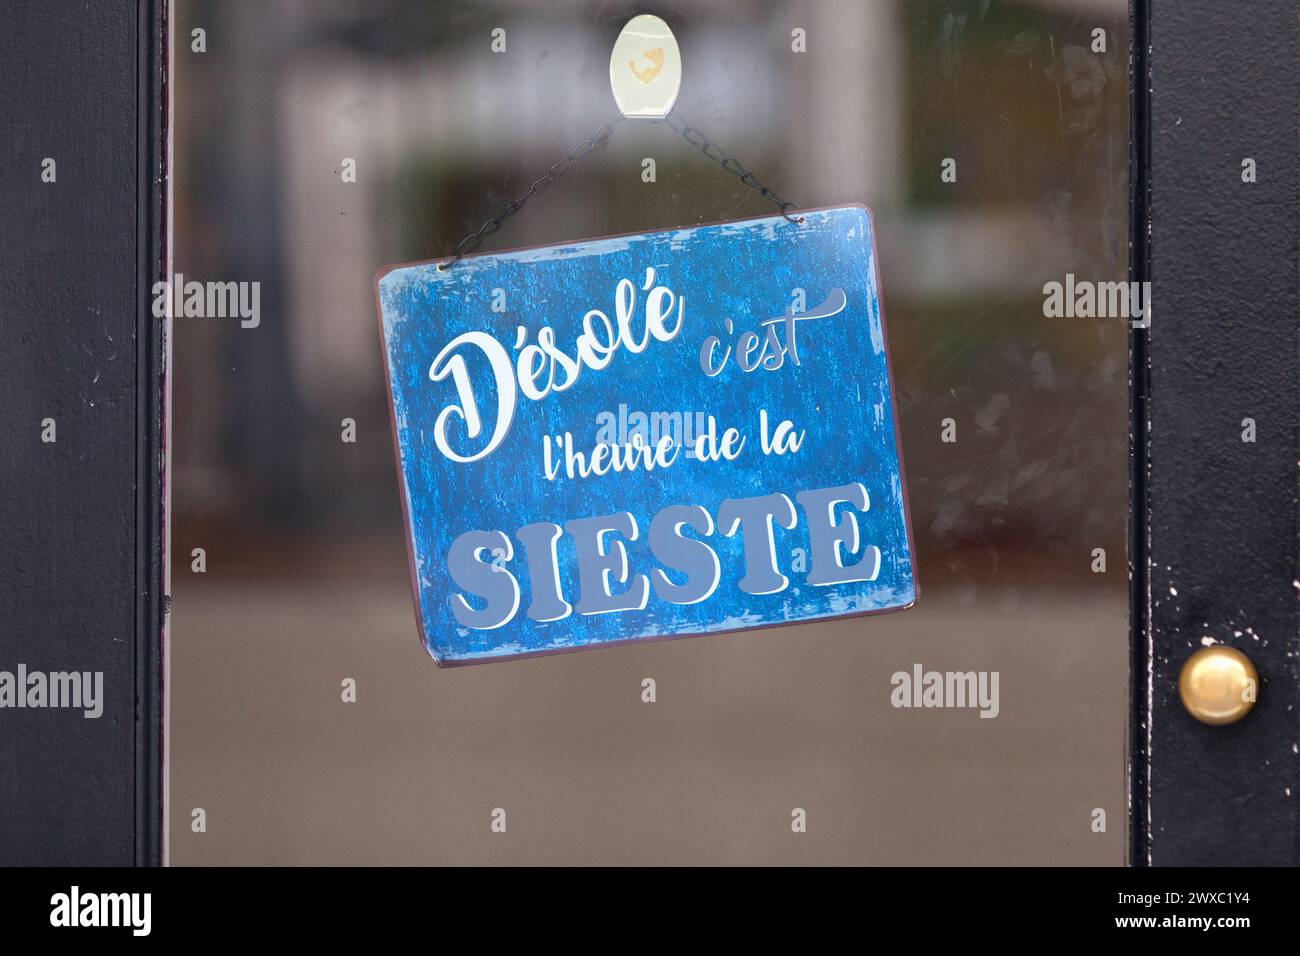 Blue open sign with written in it in French 'Désolé, c'est l'heure de la sieste', meaning in English 'Sorry, it's naptime'. Stock Photo